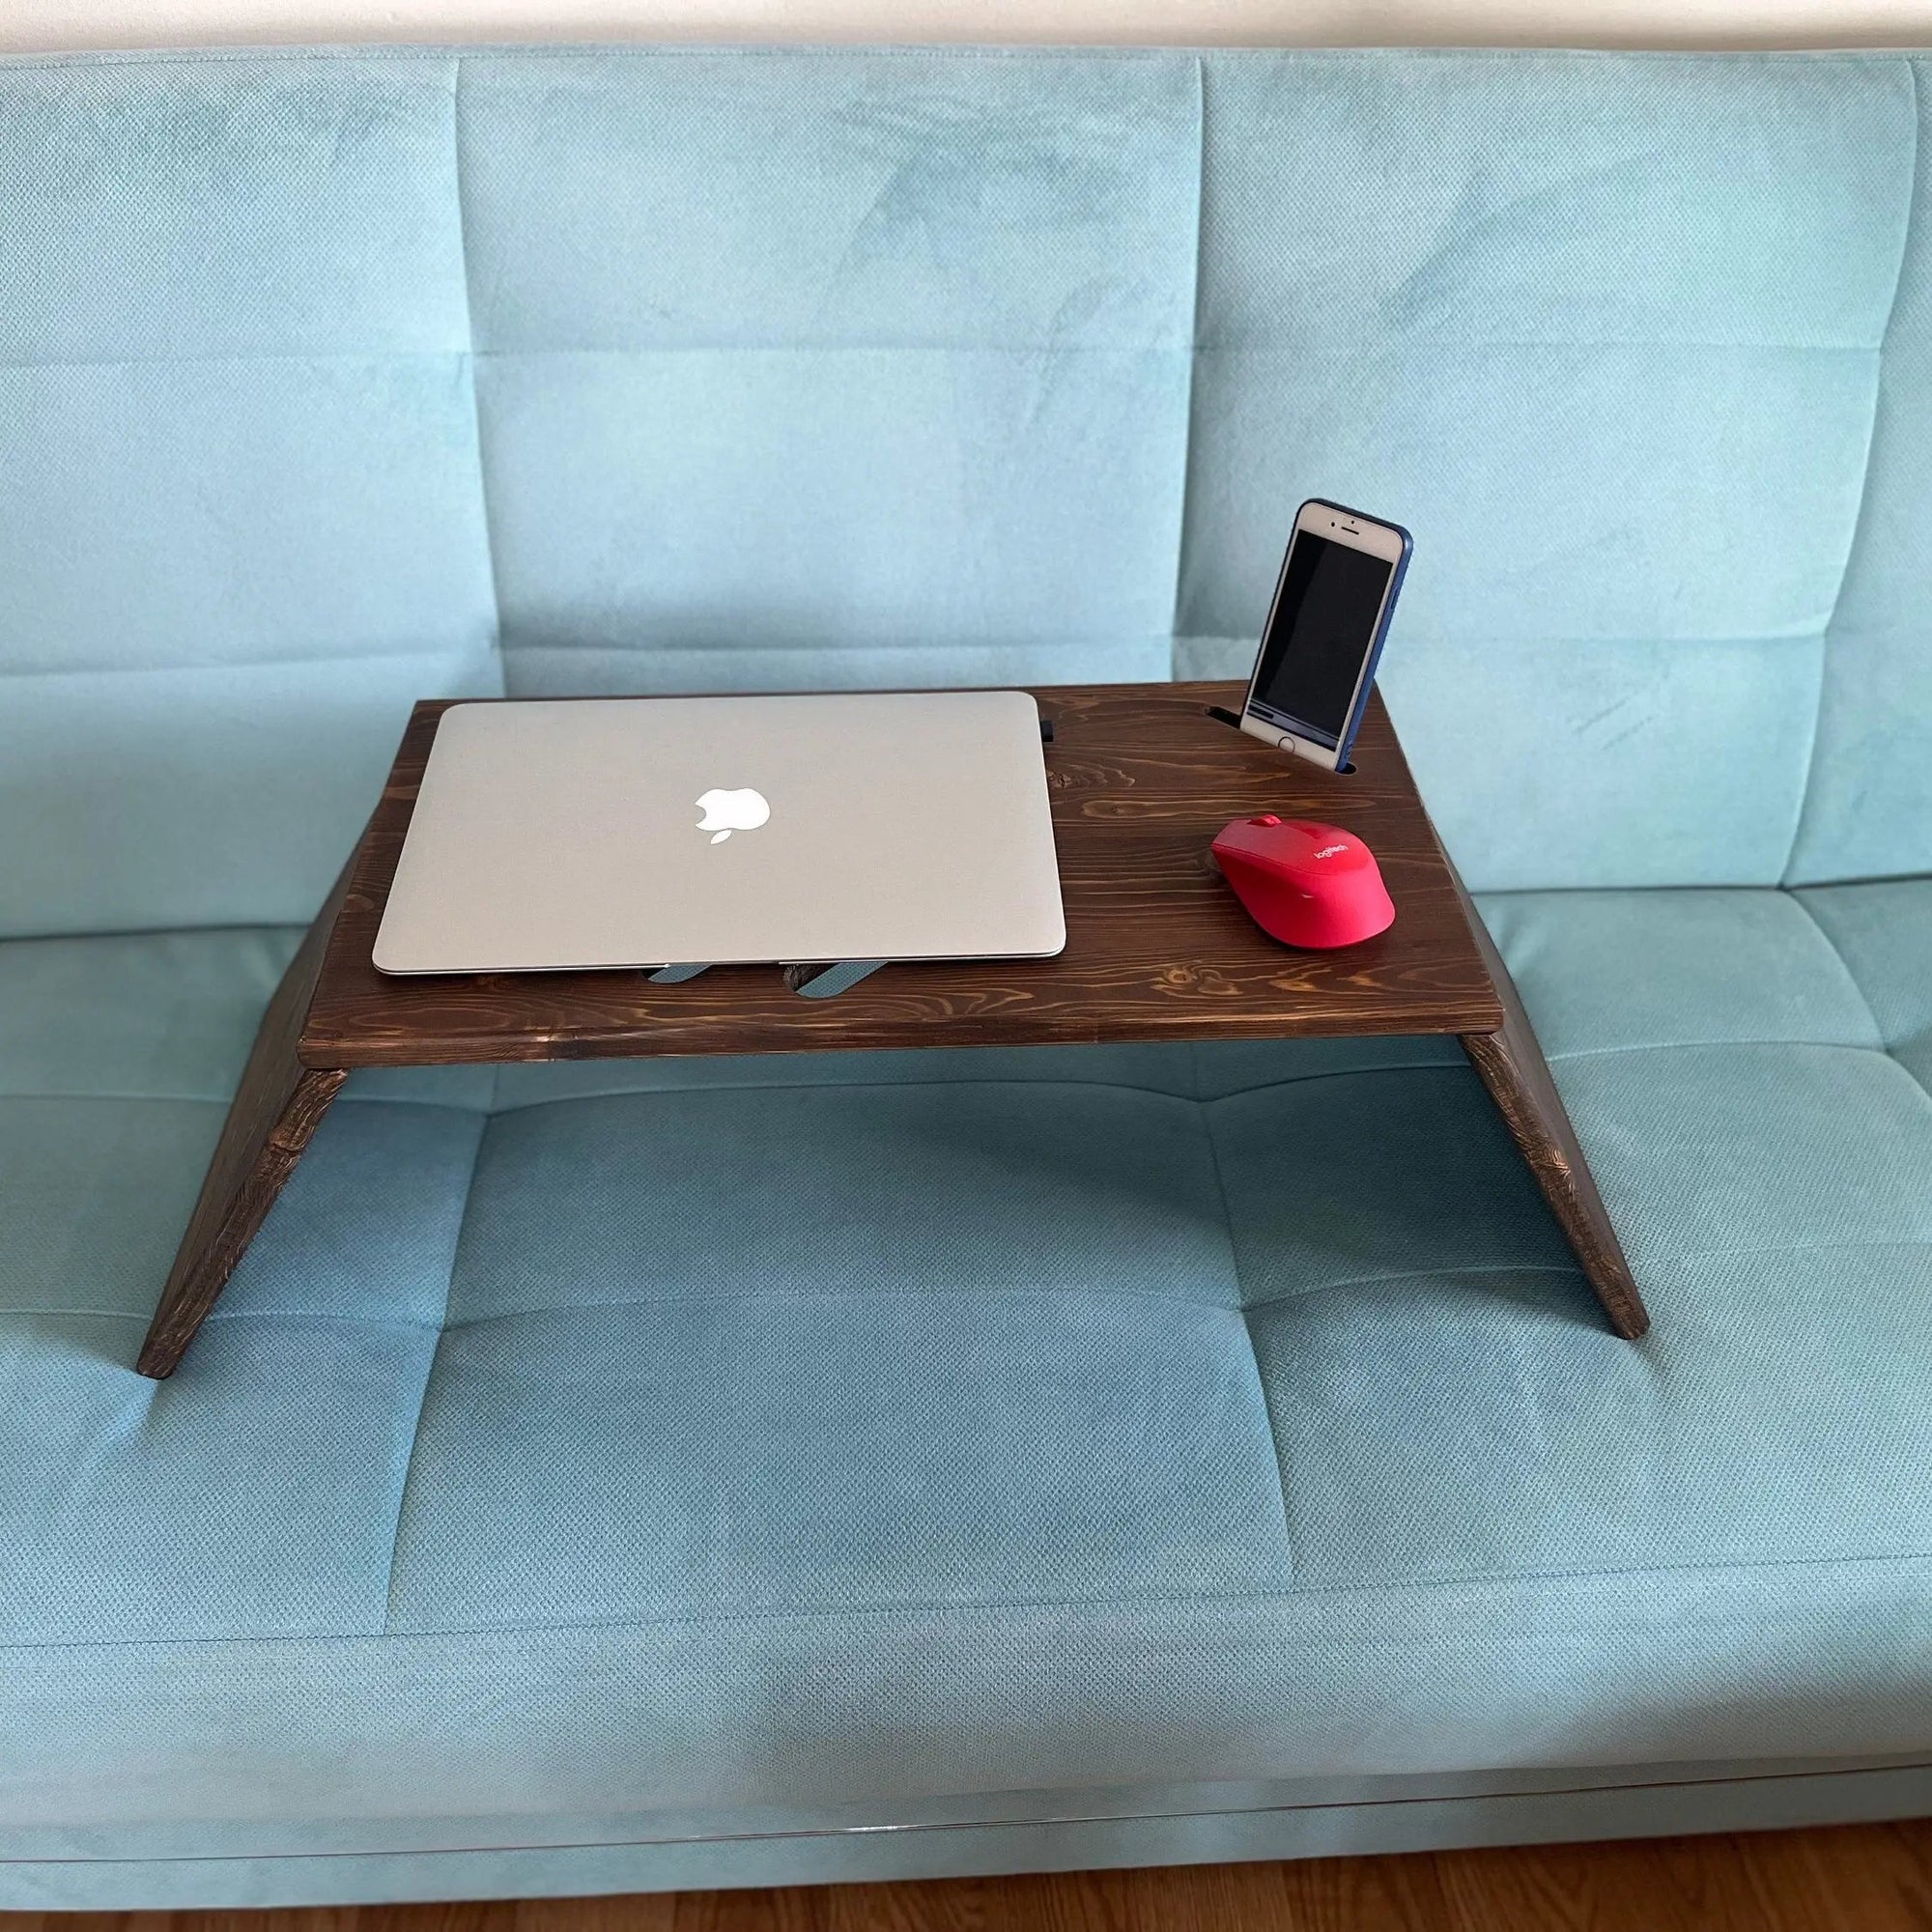 Spacesaver Laptop Stand On Wooden